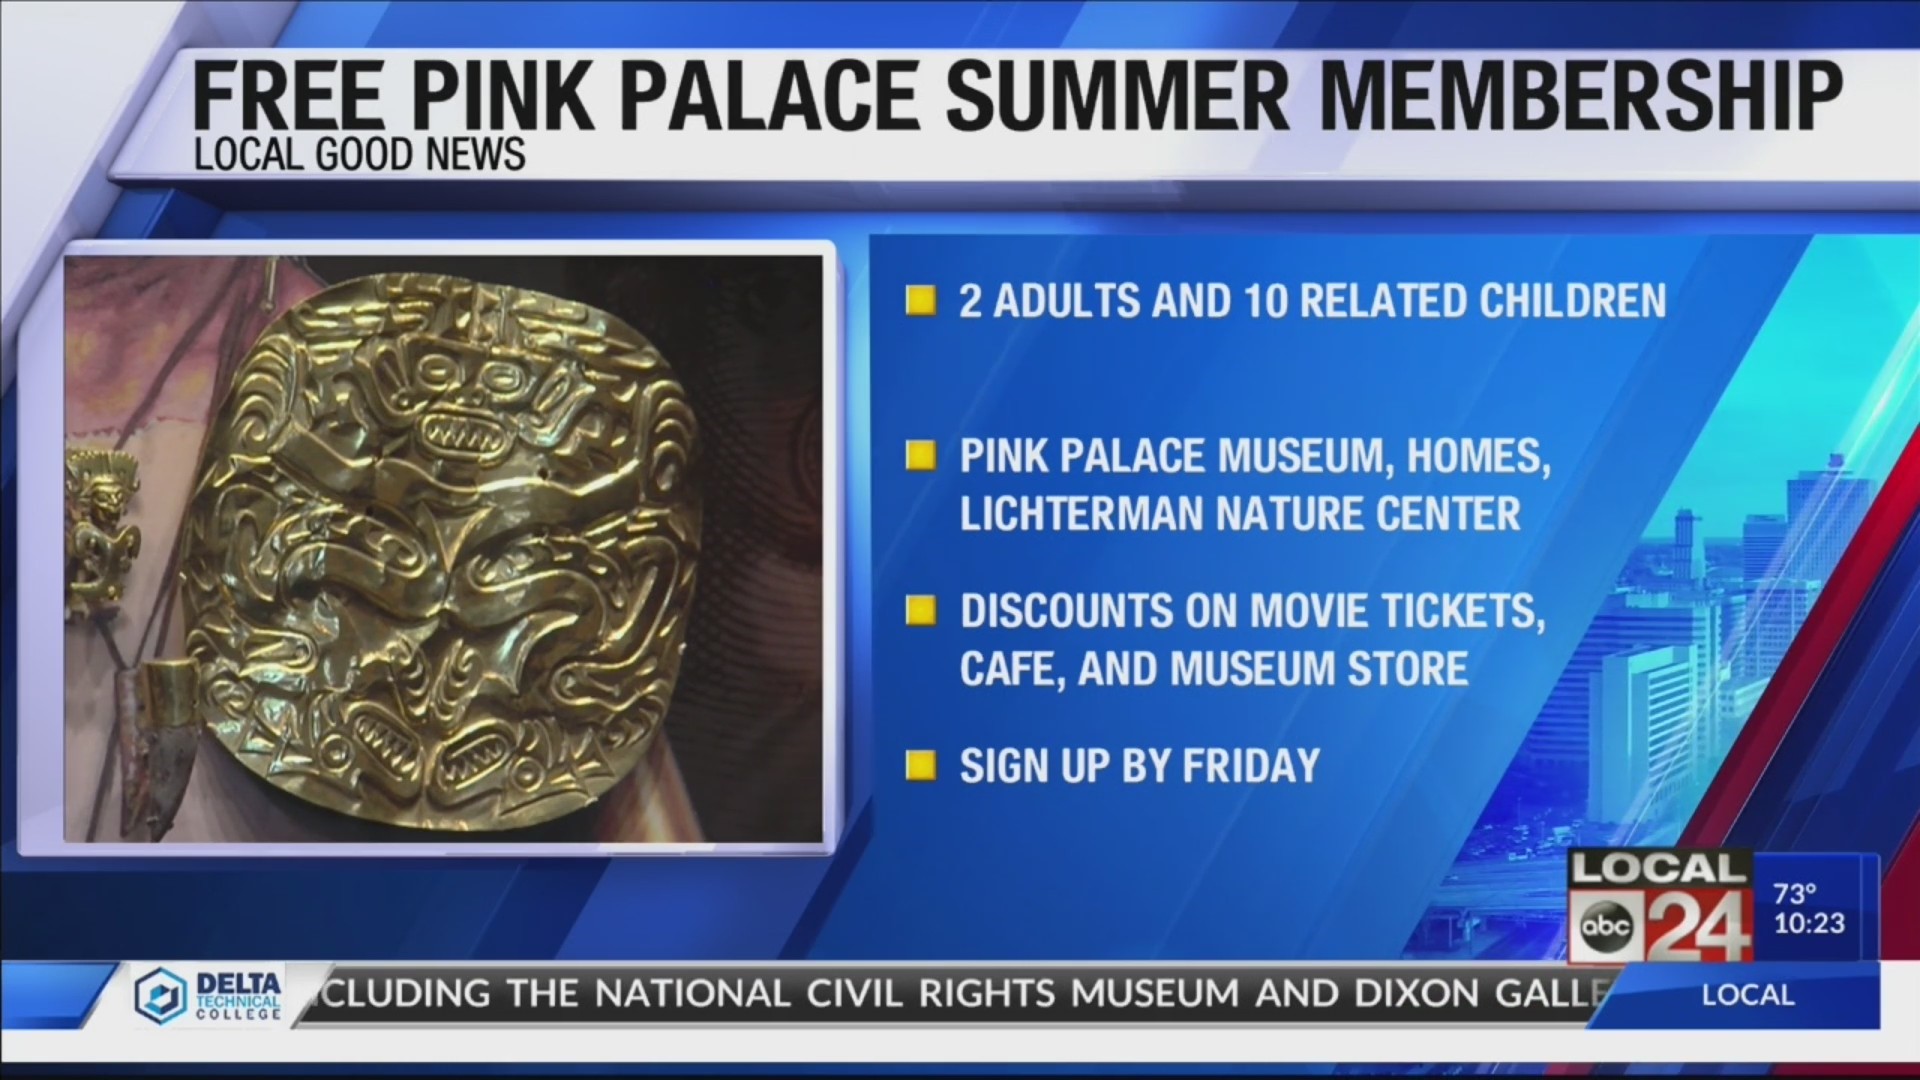 Pink Palace Family of Museums offers free 90-day trial summer membership